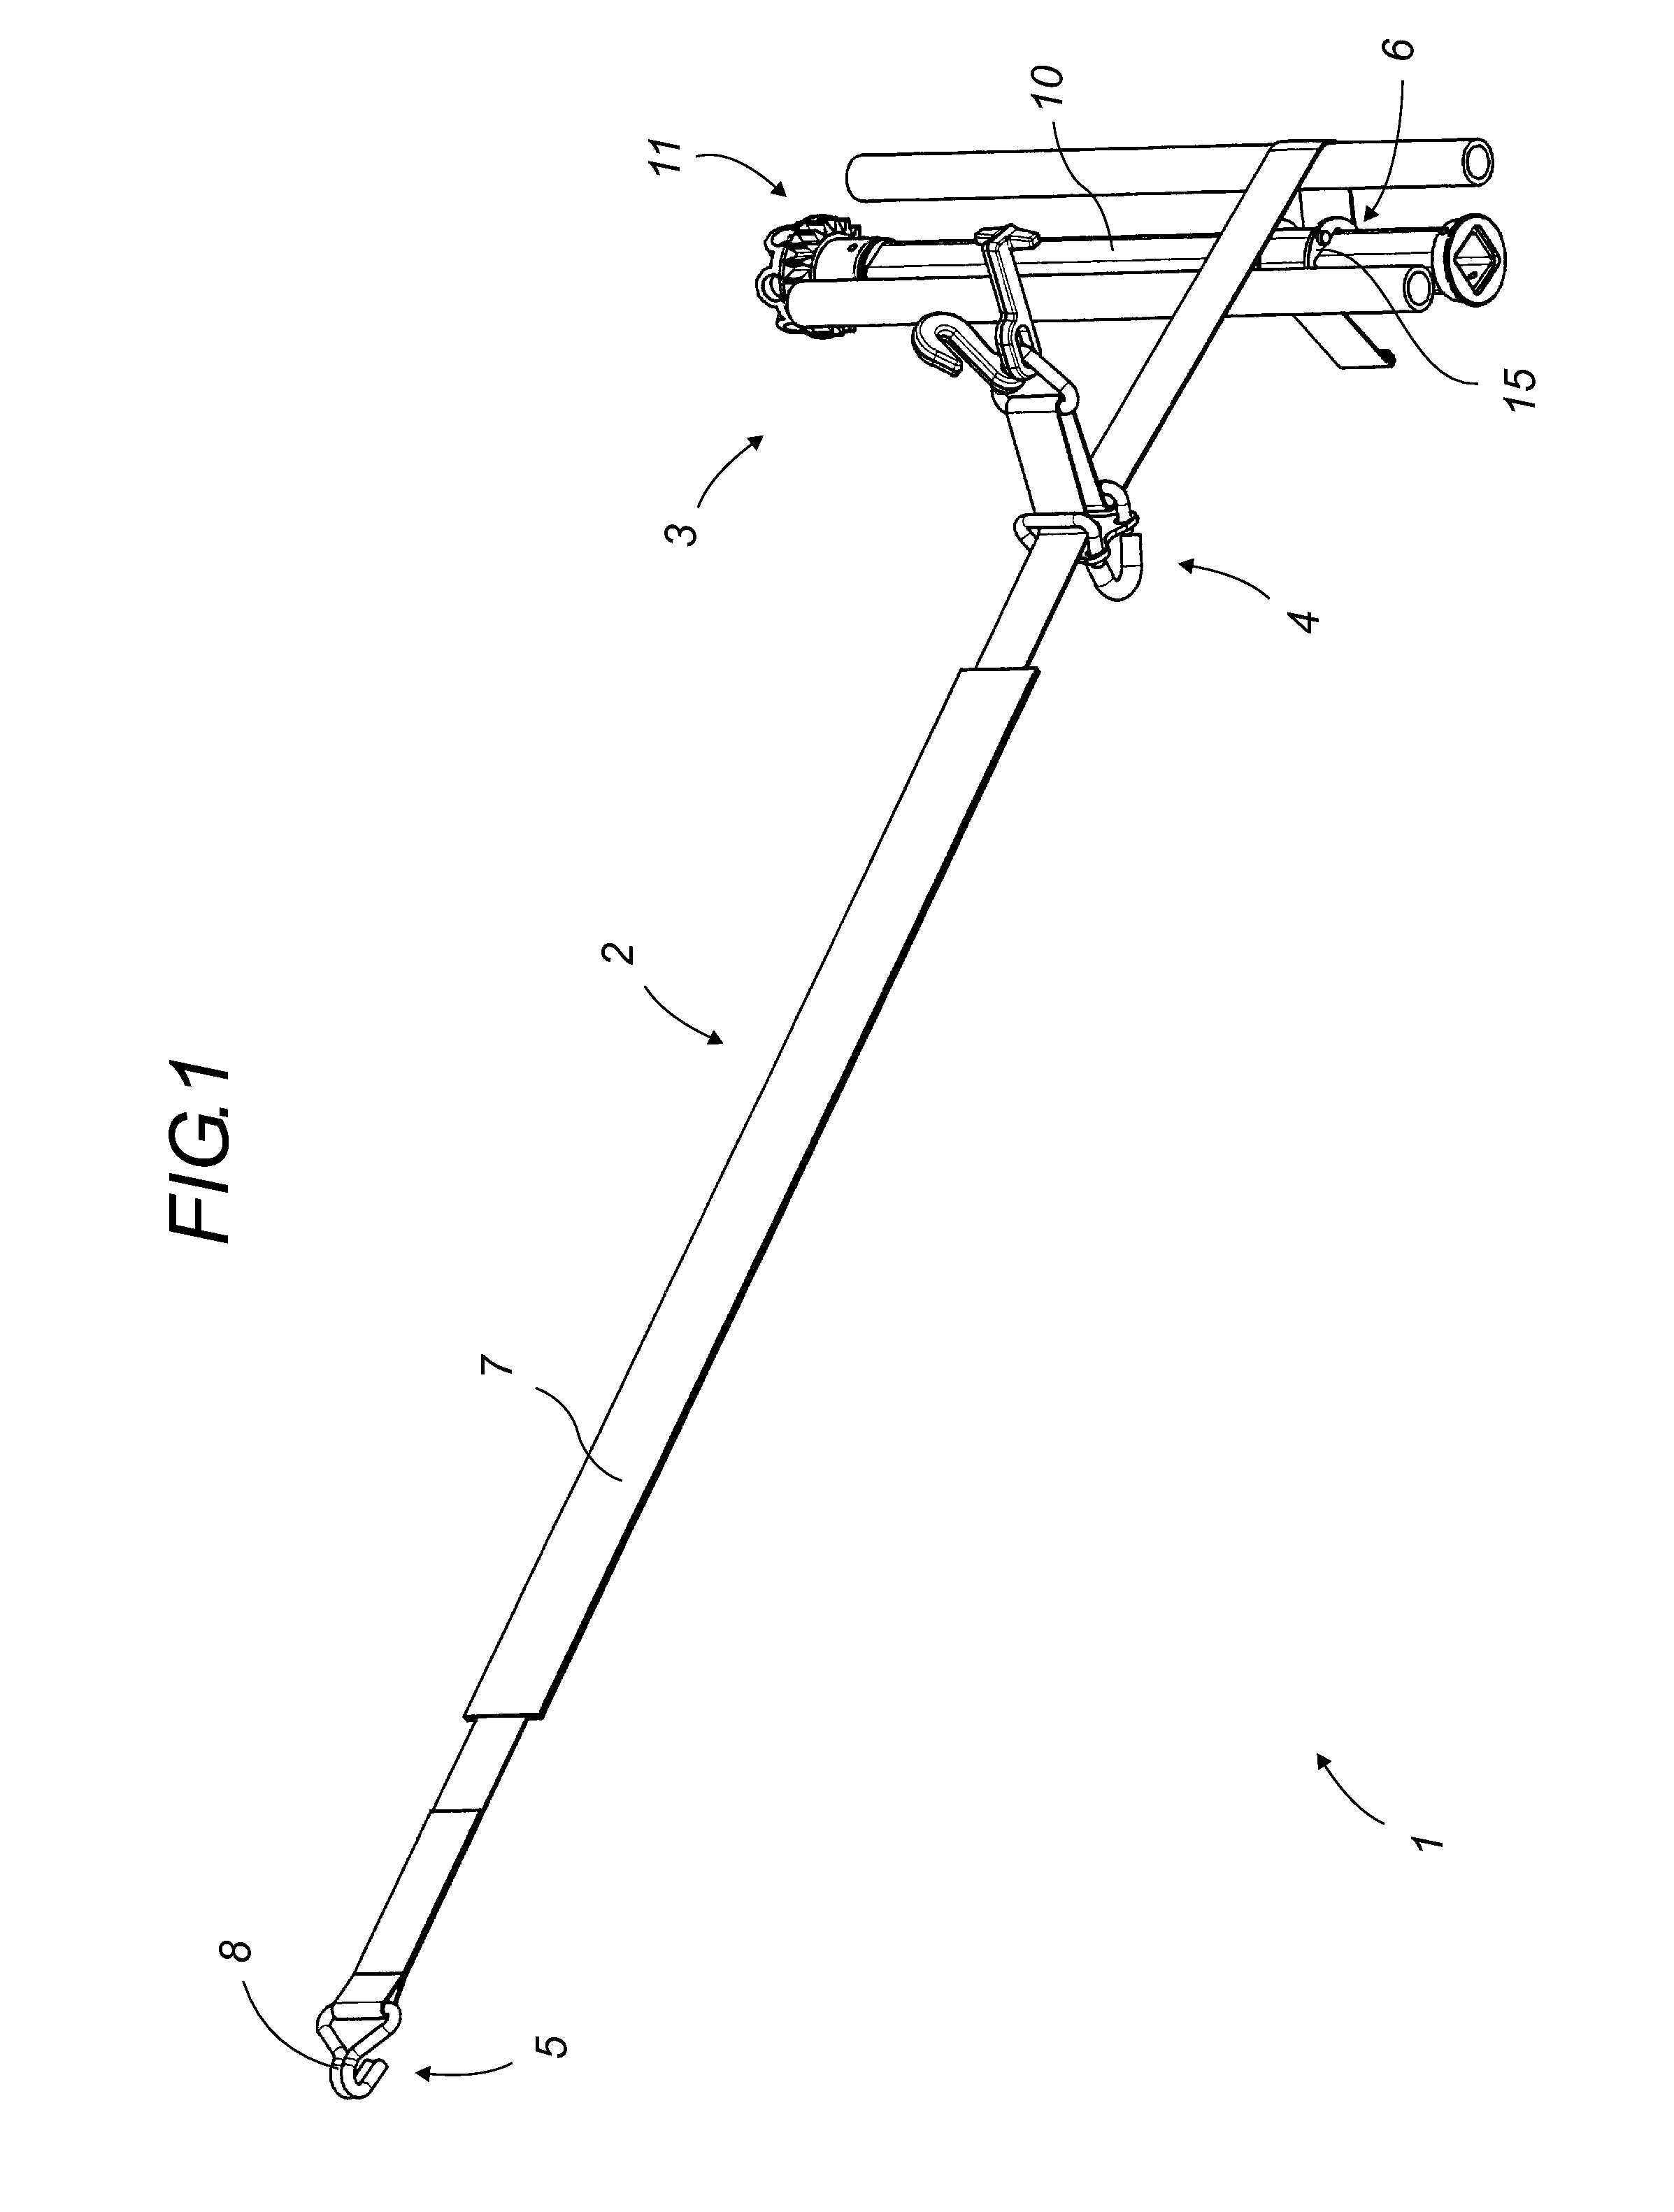 Device for stowing a road vehicle on a bearing plane so that it can be transported by another vehicle